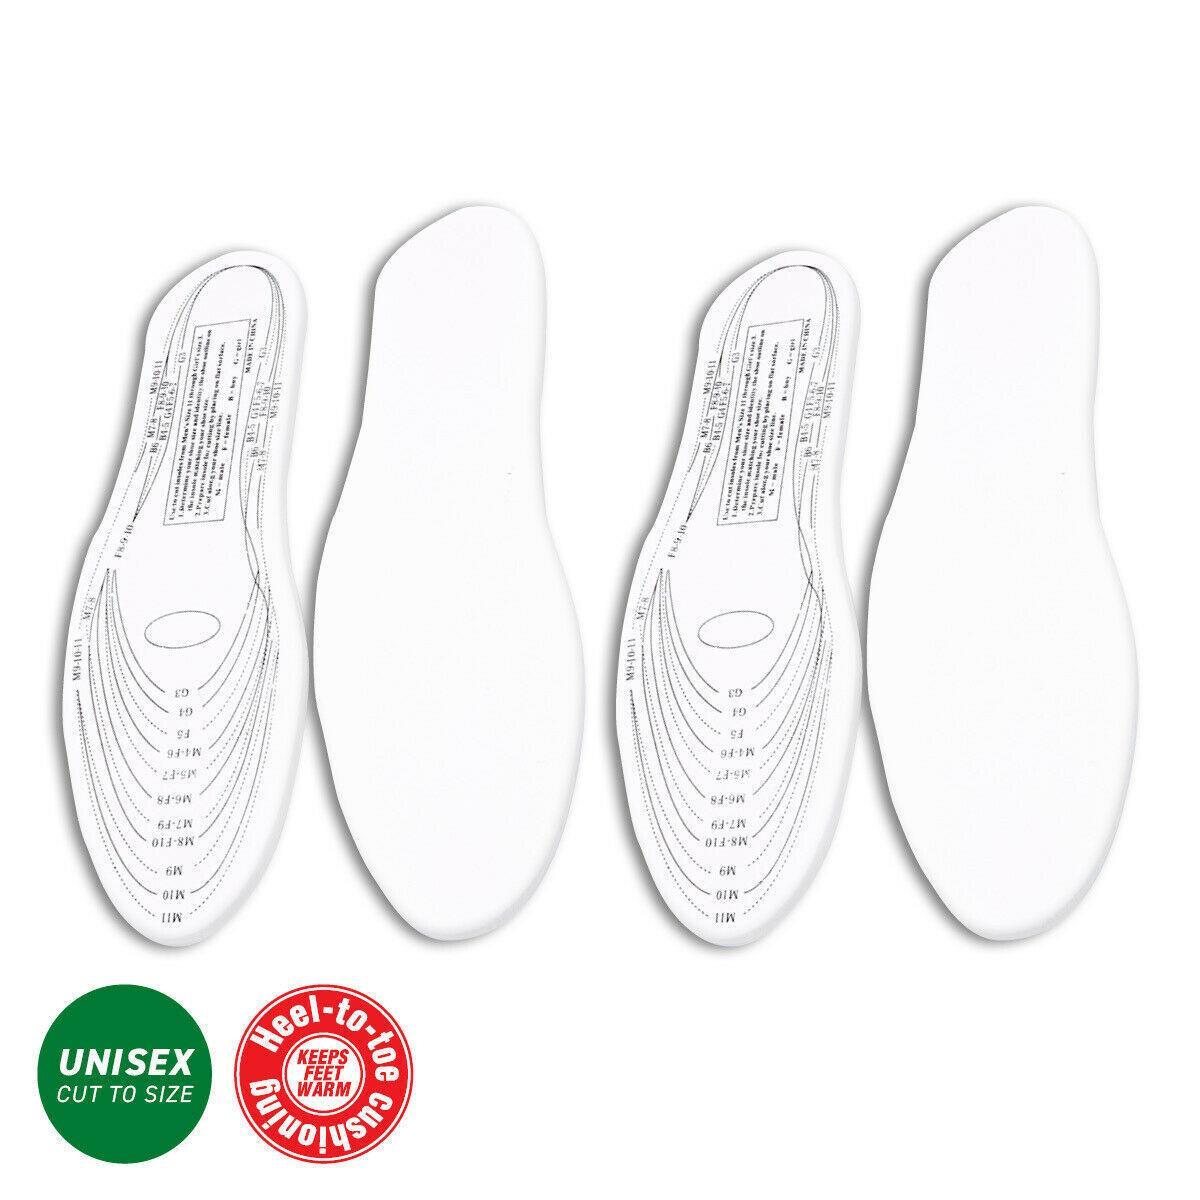 2x Memory Foam Shoes Insoles Trainer Foot Care Pain Relief Cushion Comfort AU NEW